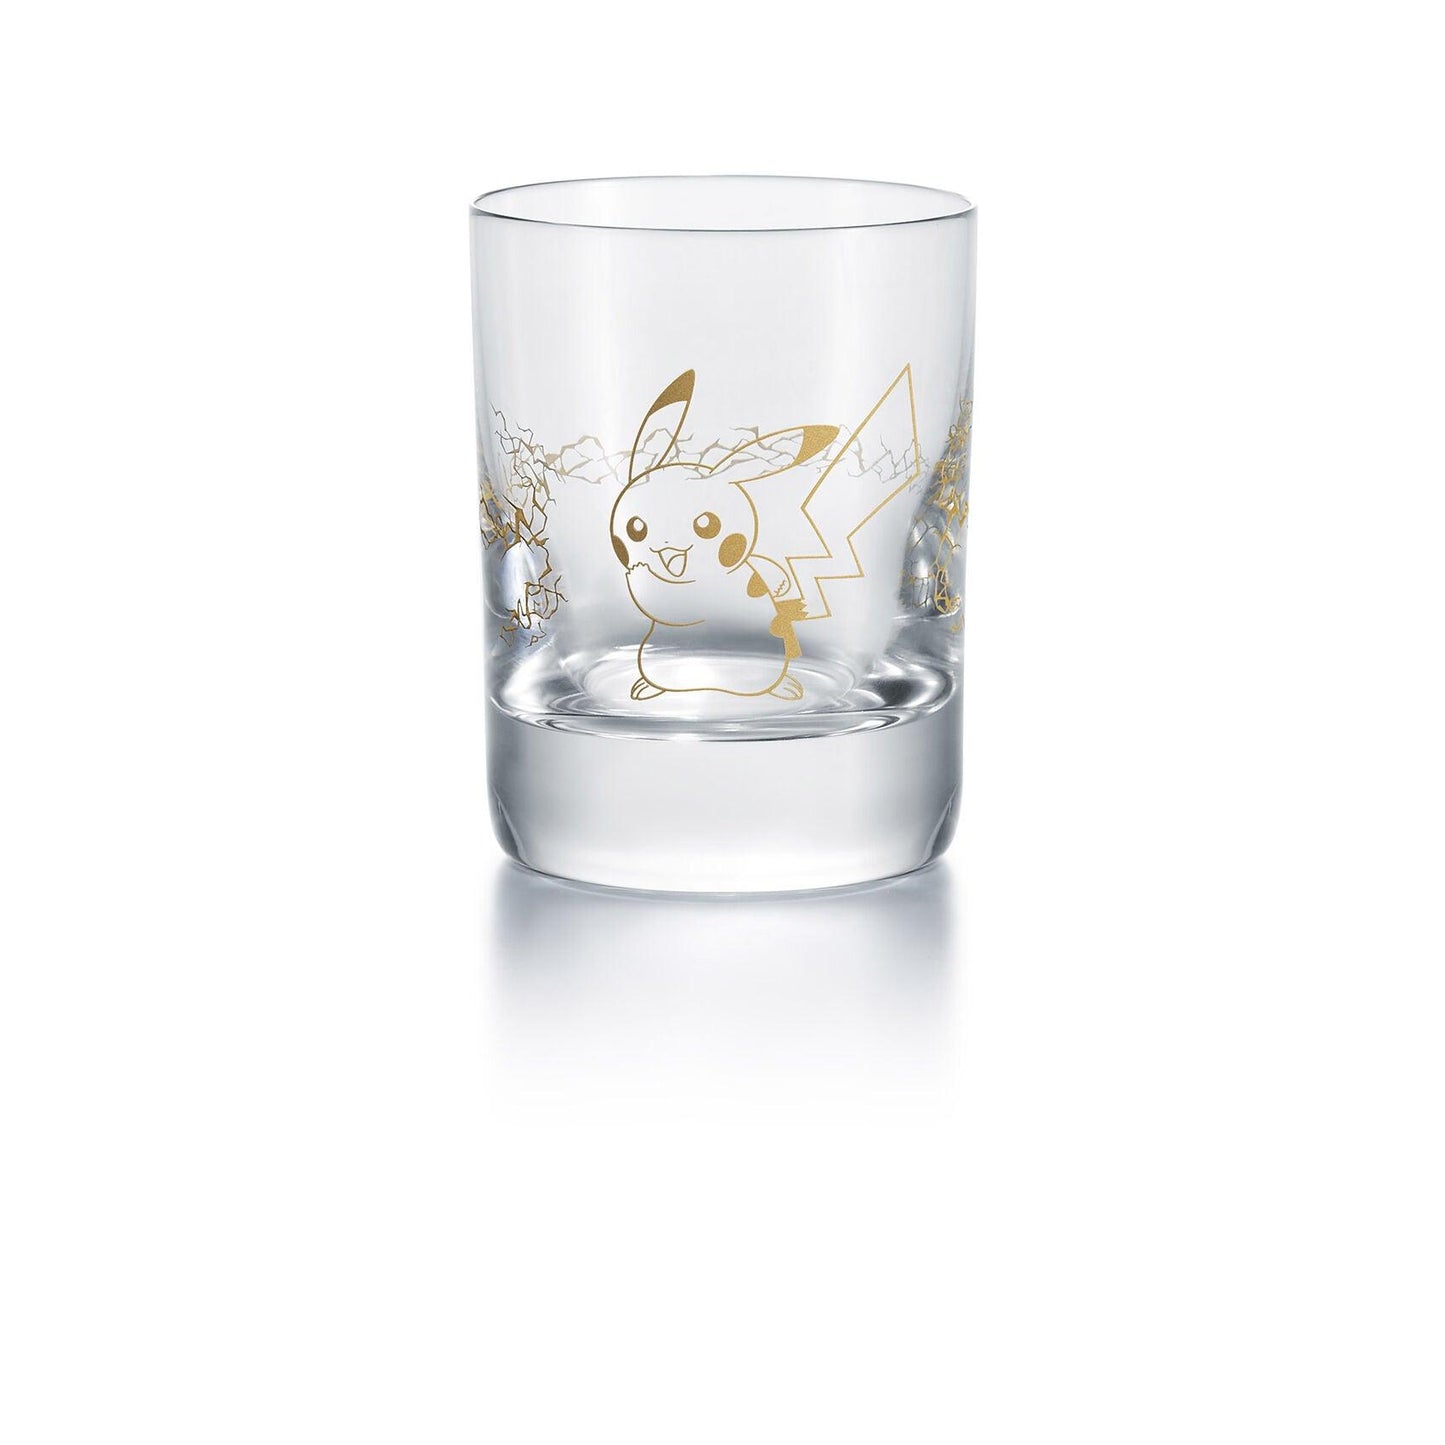 Pop Art Fusion - PopArtFusion - Baccarat Baccarat x Pokemon - PIKACHU LIGHTNING GOLD - Exclusive Pokémon collaboration Crystal clear tumbler with fine gold ©2022 Pokémon 2815139 popartfusion.com by Conectid